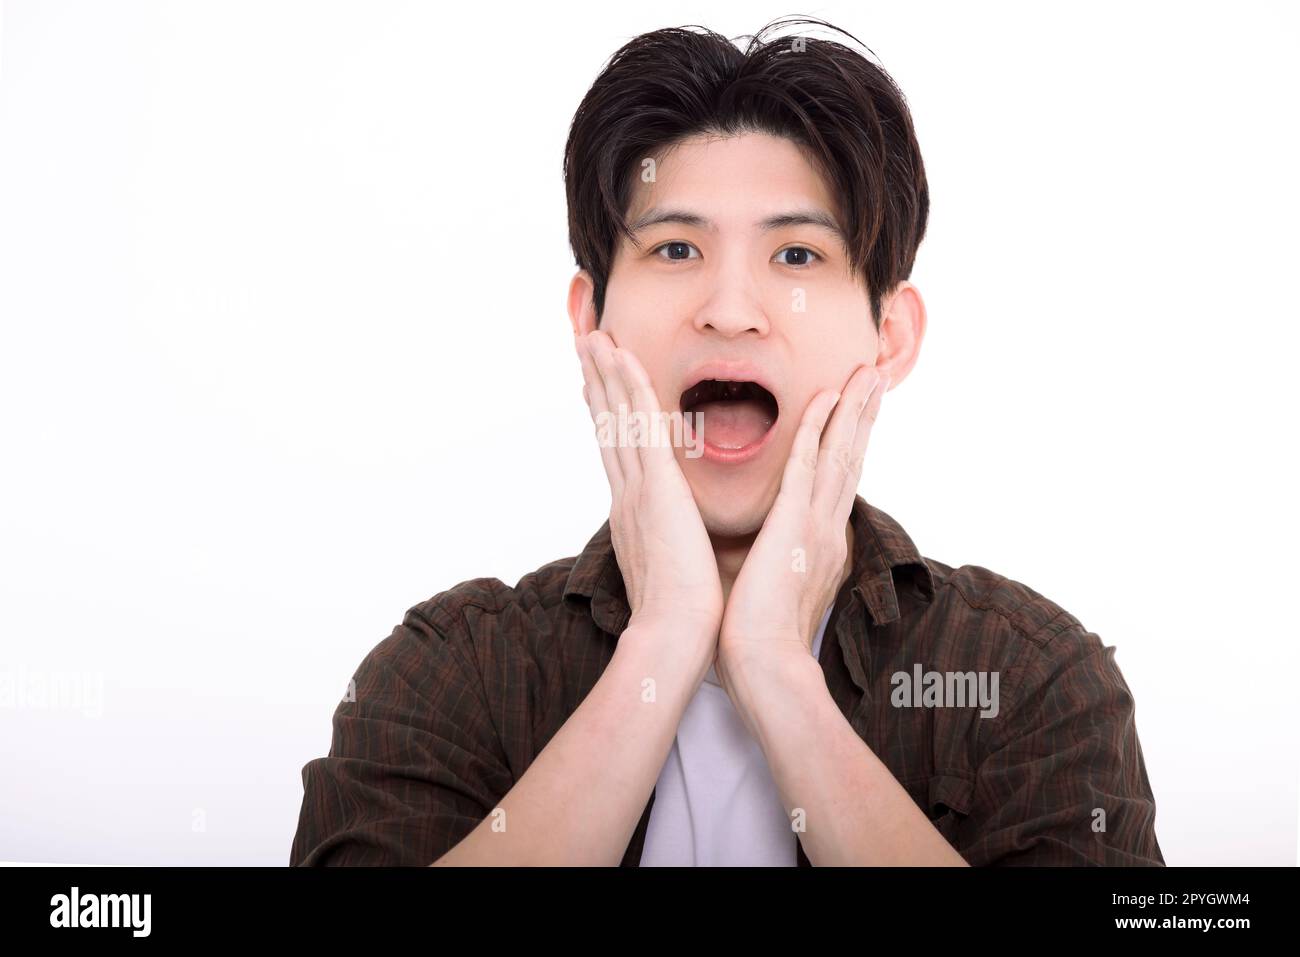 surprised young man looking at camera Stock Photo